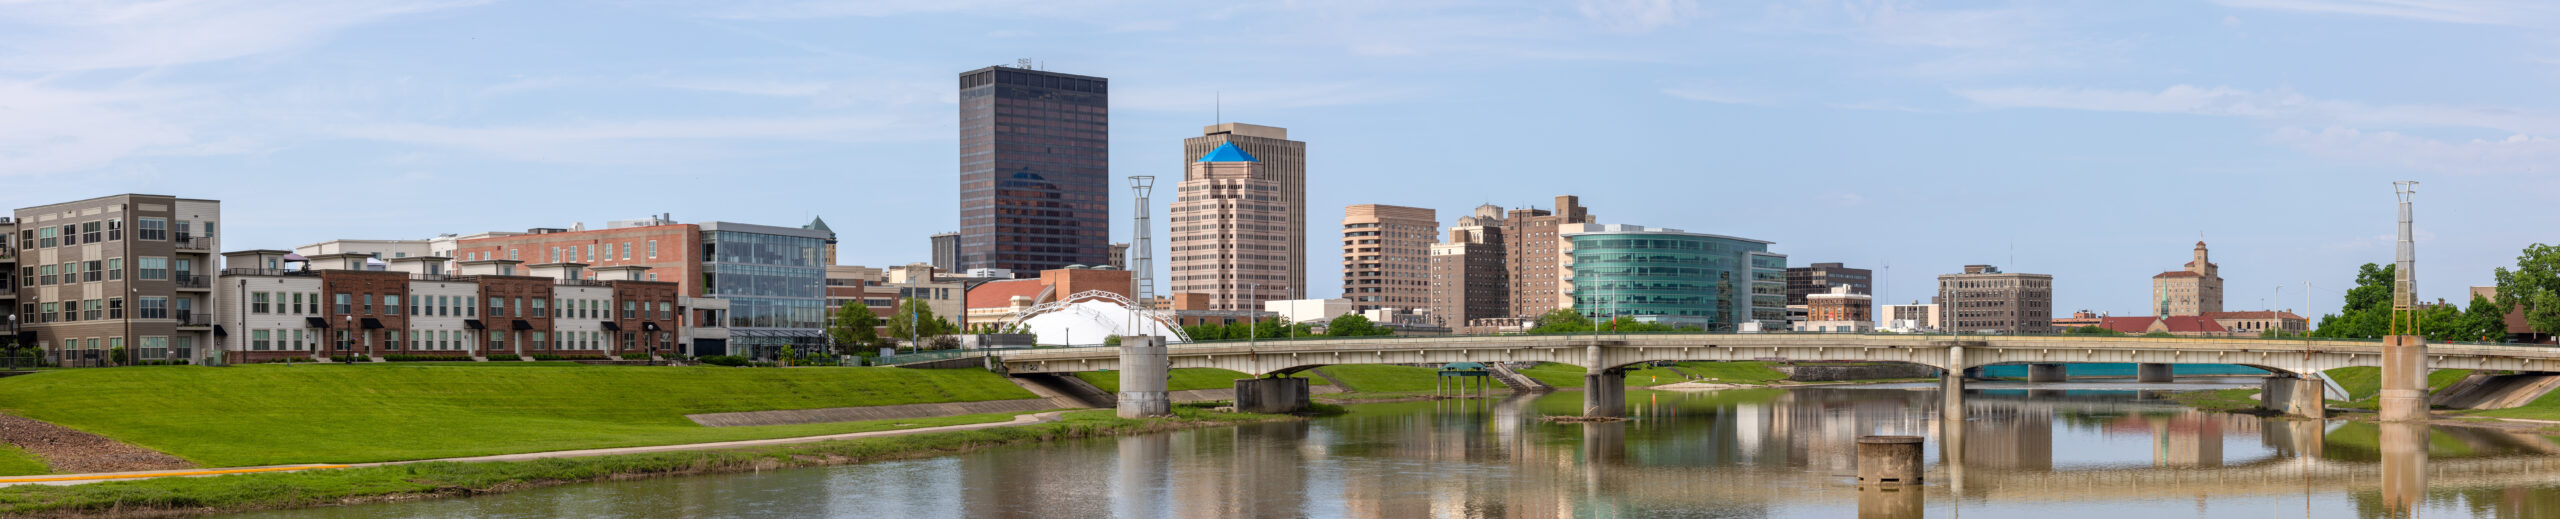 View of downtown Dayton from across the river